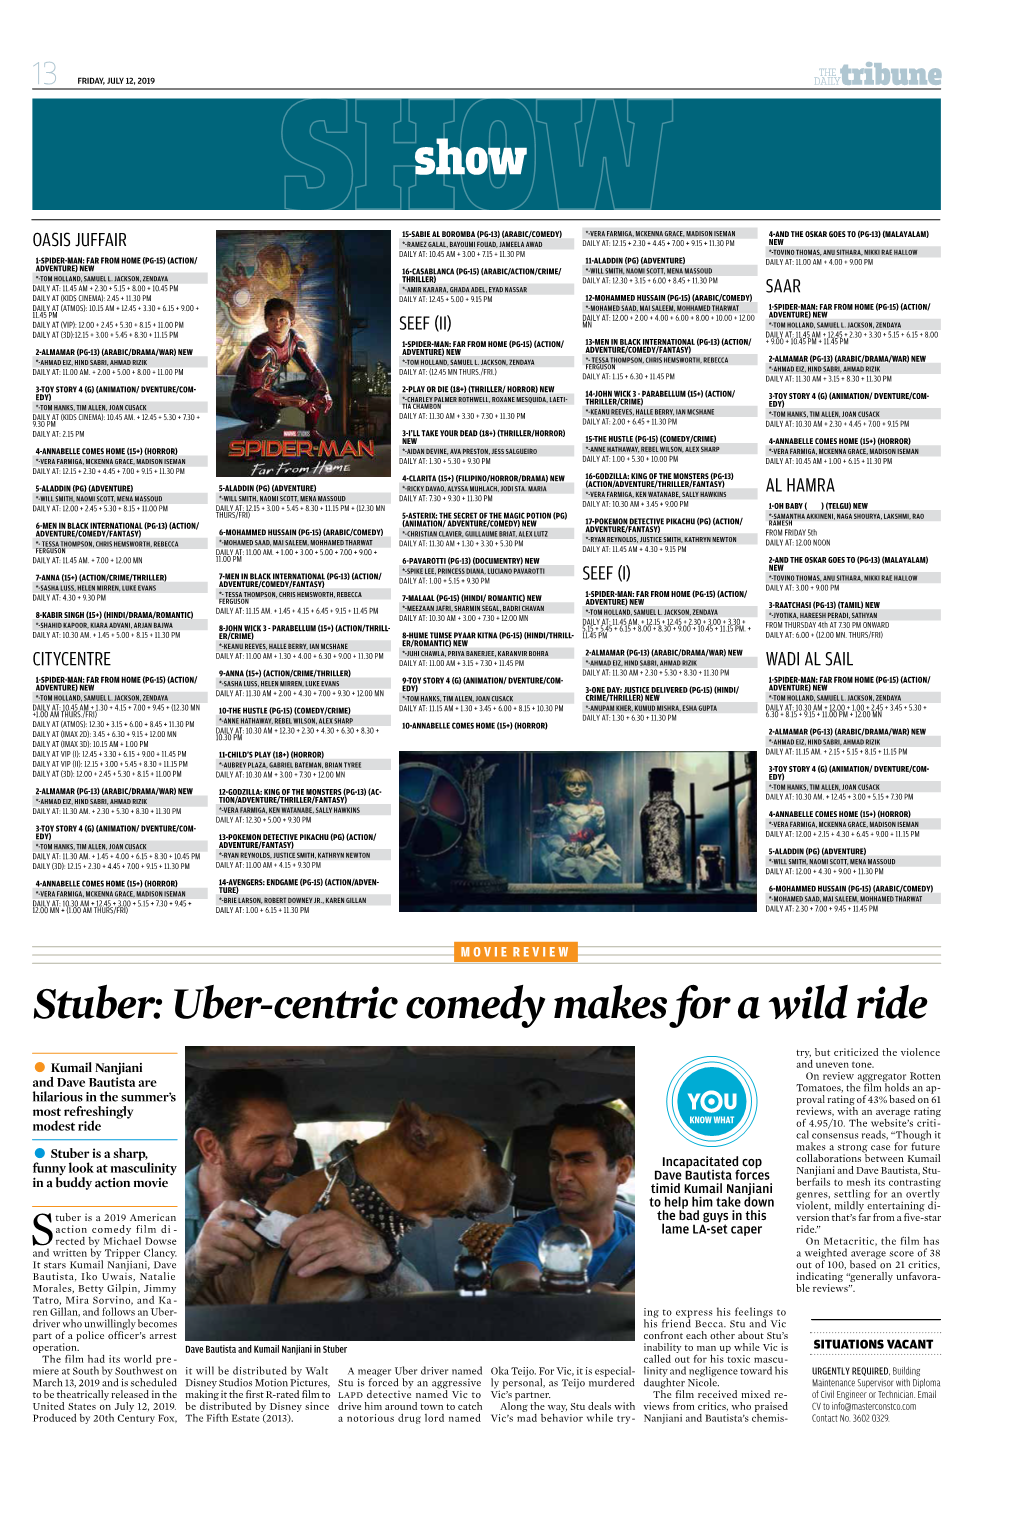 Stuber: Uber-Centric Comedy Makes for a Wild Ride